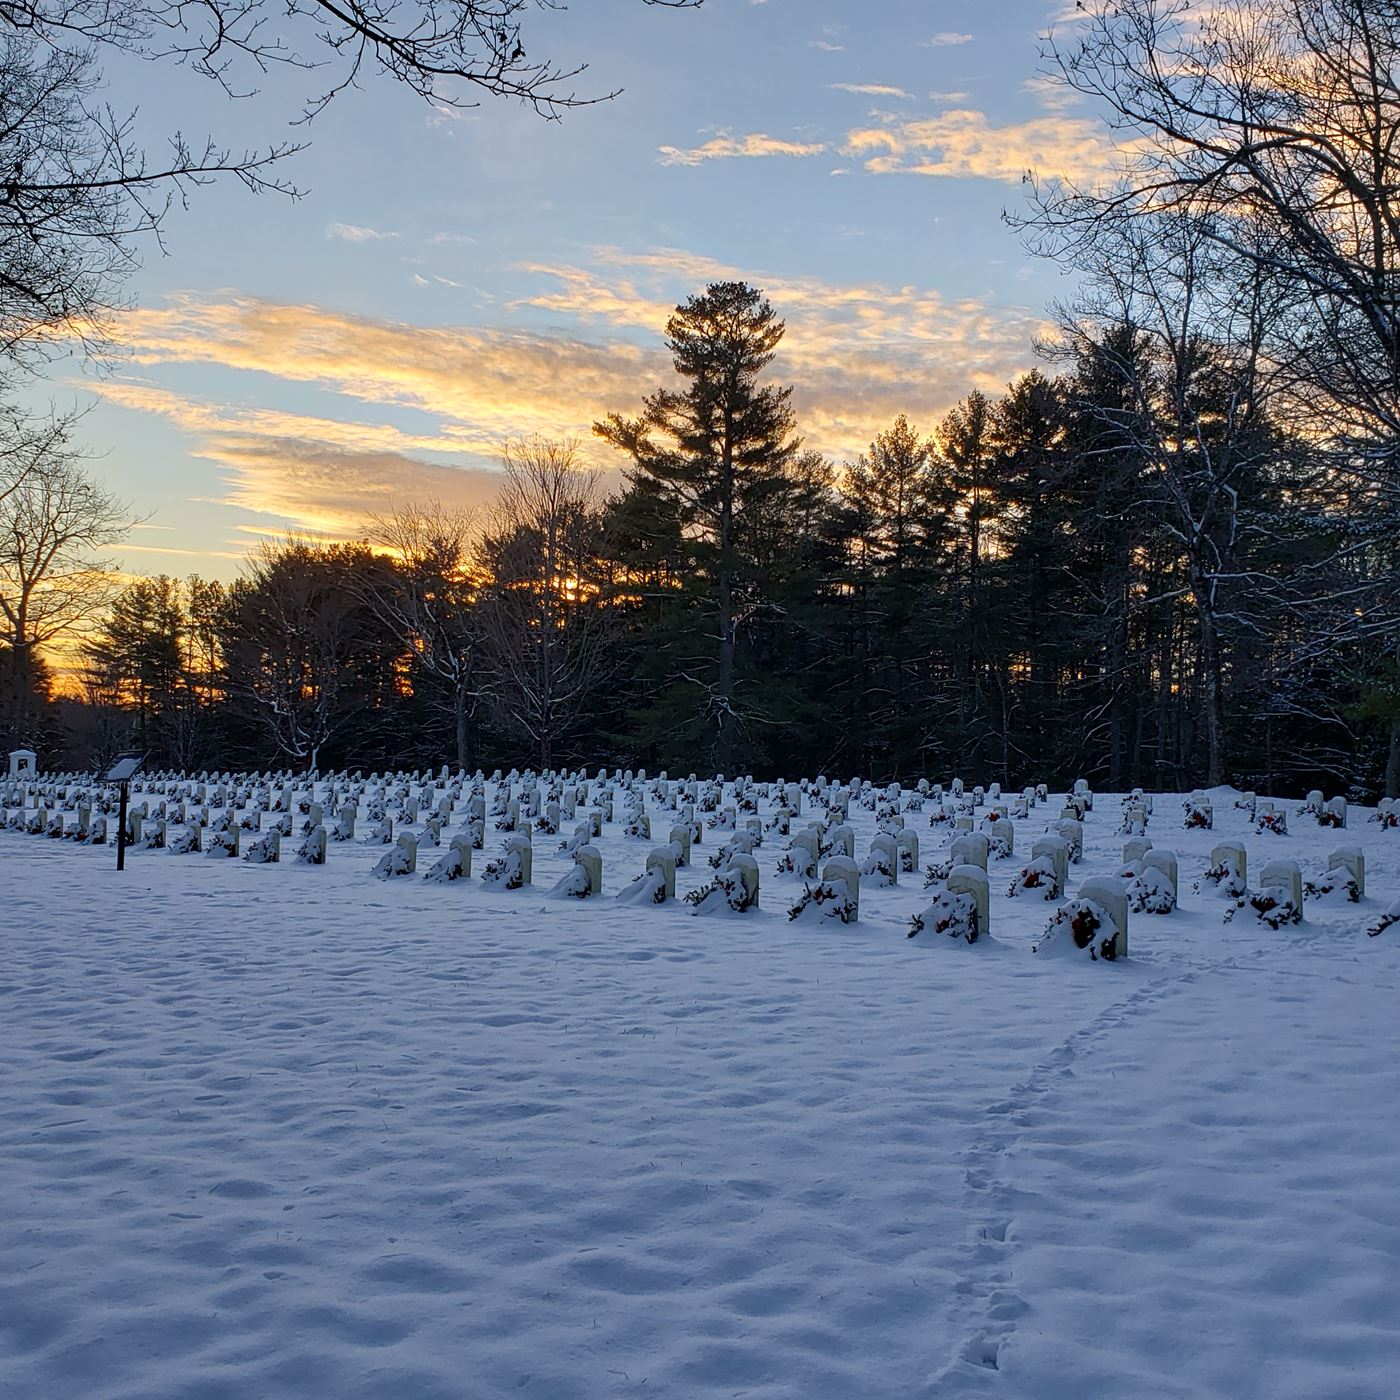 Sunset on December 19, 2021 after the snow storm.